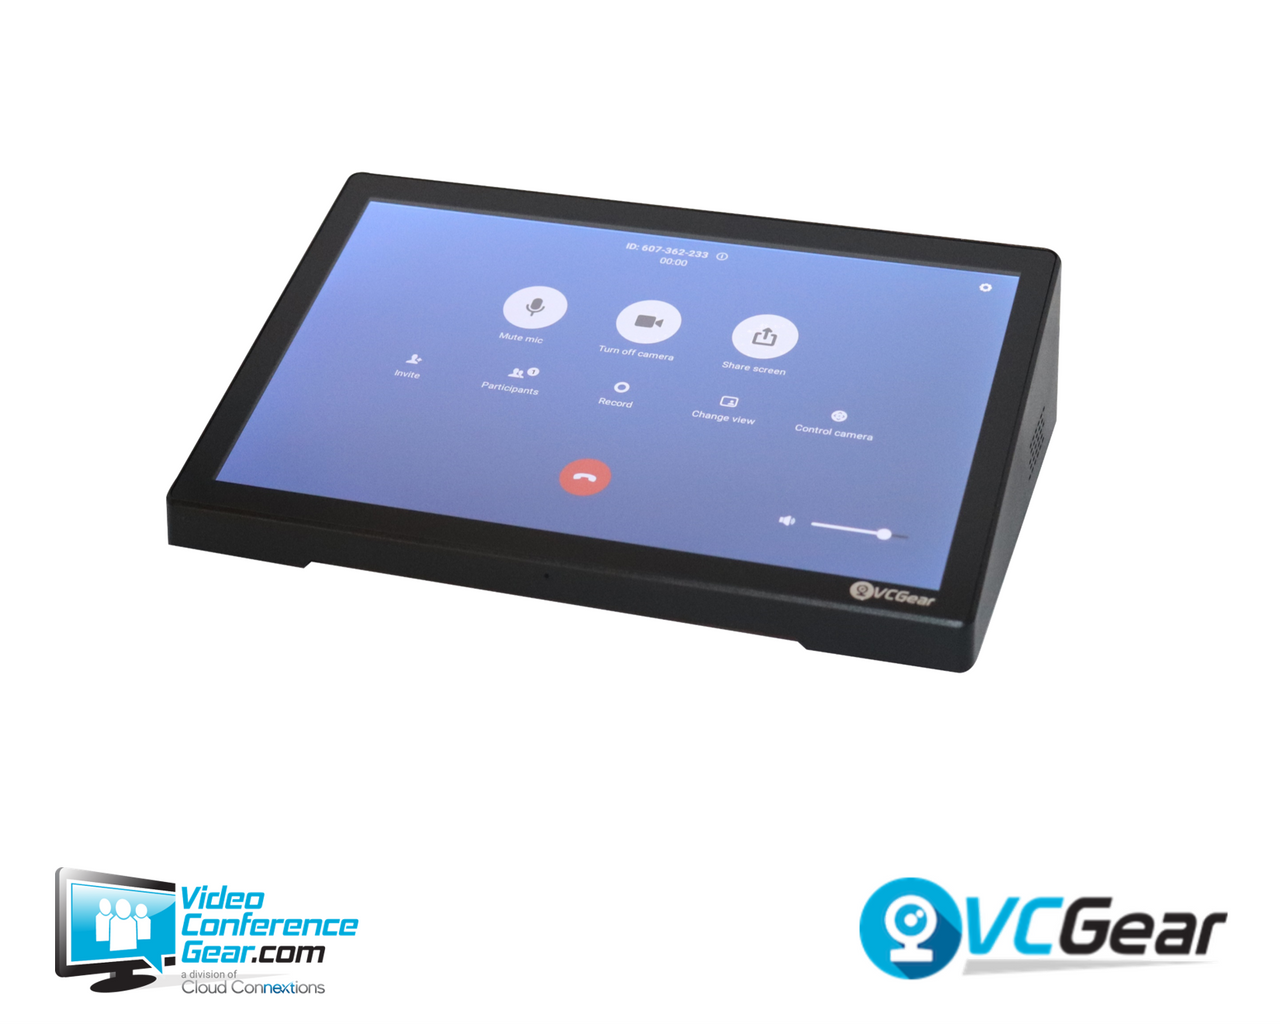 Conference Room Controller Preloaded with RingCentral Rooms Controller App with Android OS and PoE